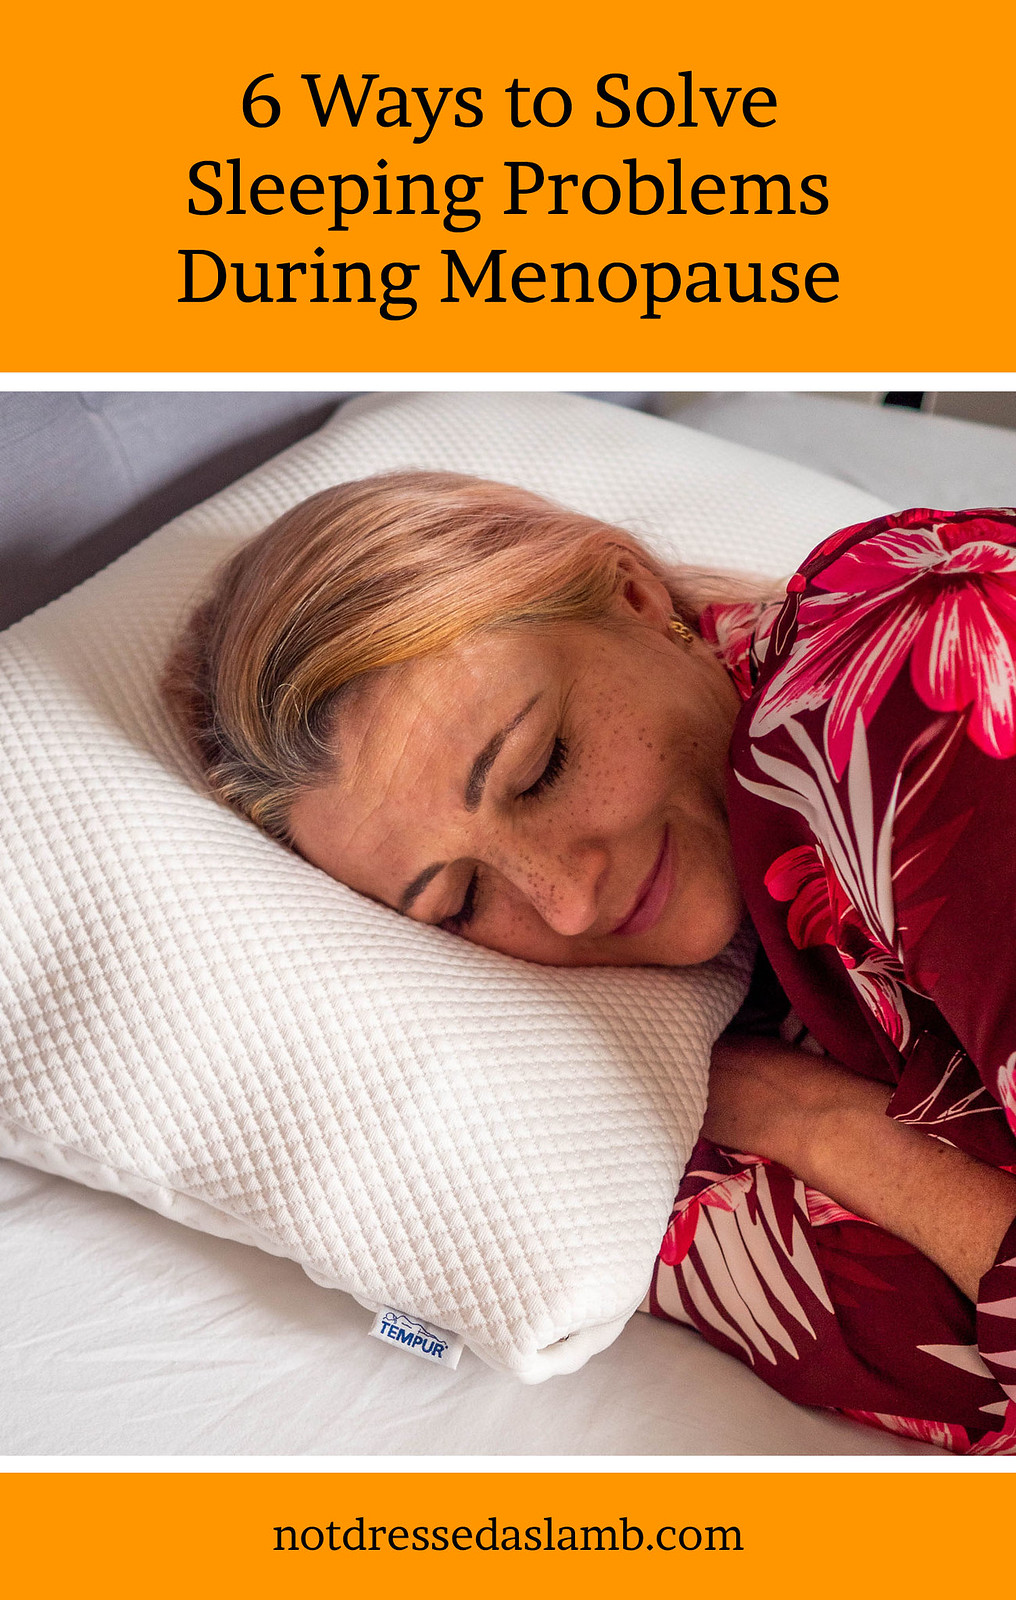 6 Ways to Solve Sleeping Problems During Menopause | by Catherine Summers, AKA Not Dressed As Lamb, Over 50 Health, Wellness and Lifestyle Blog